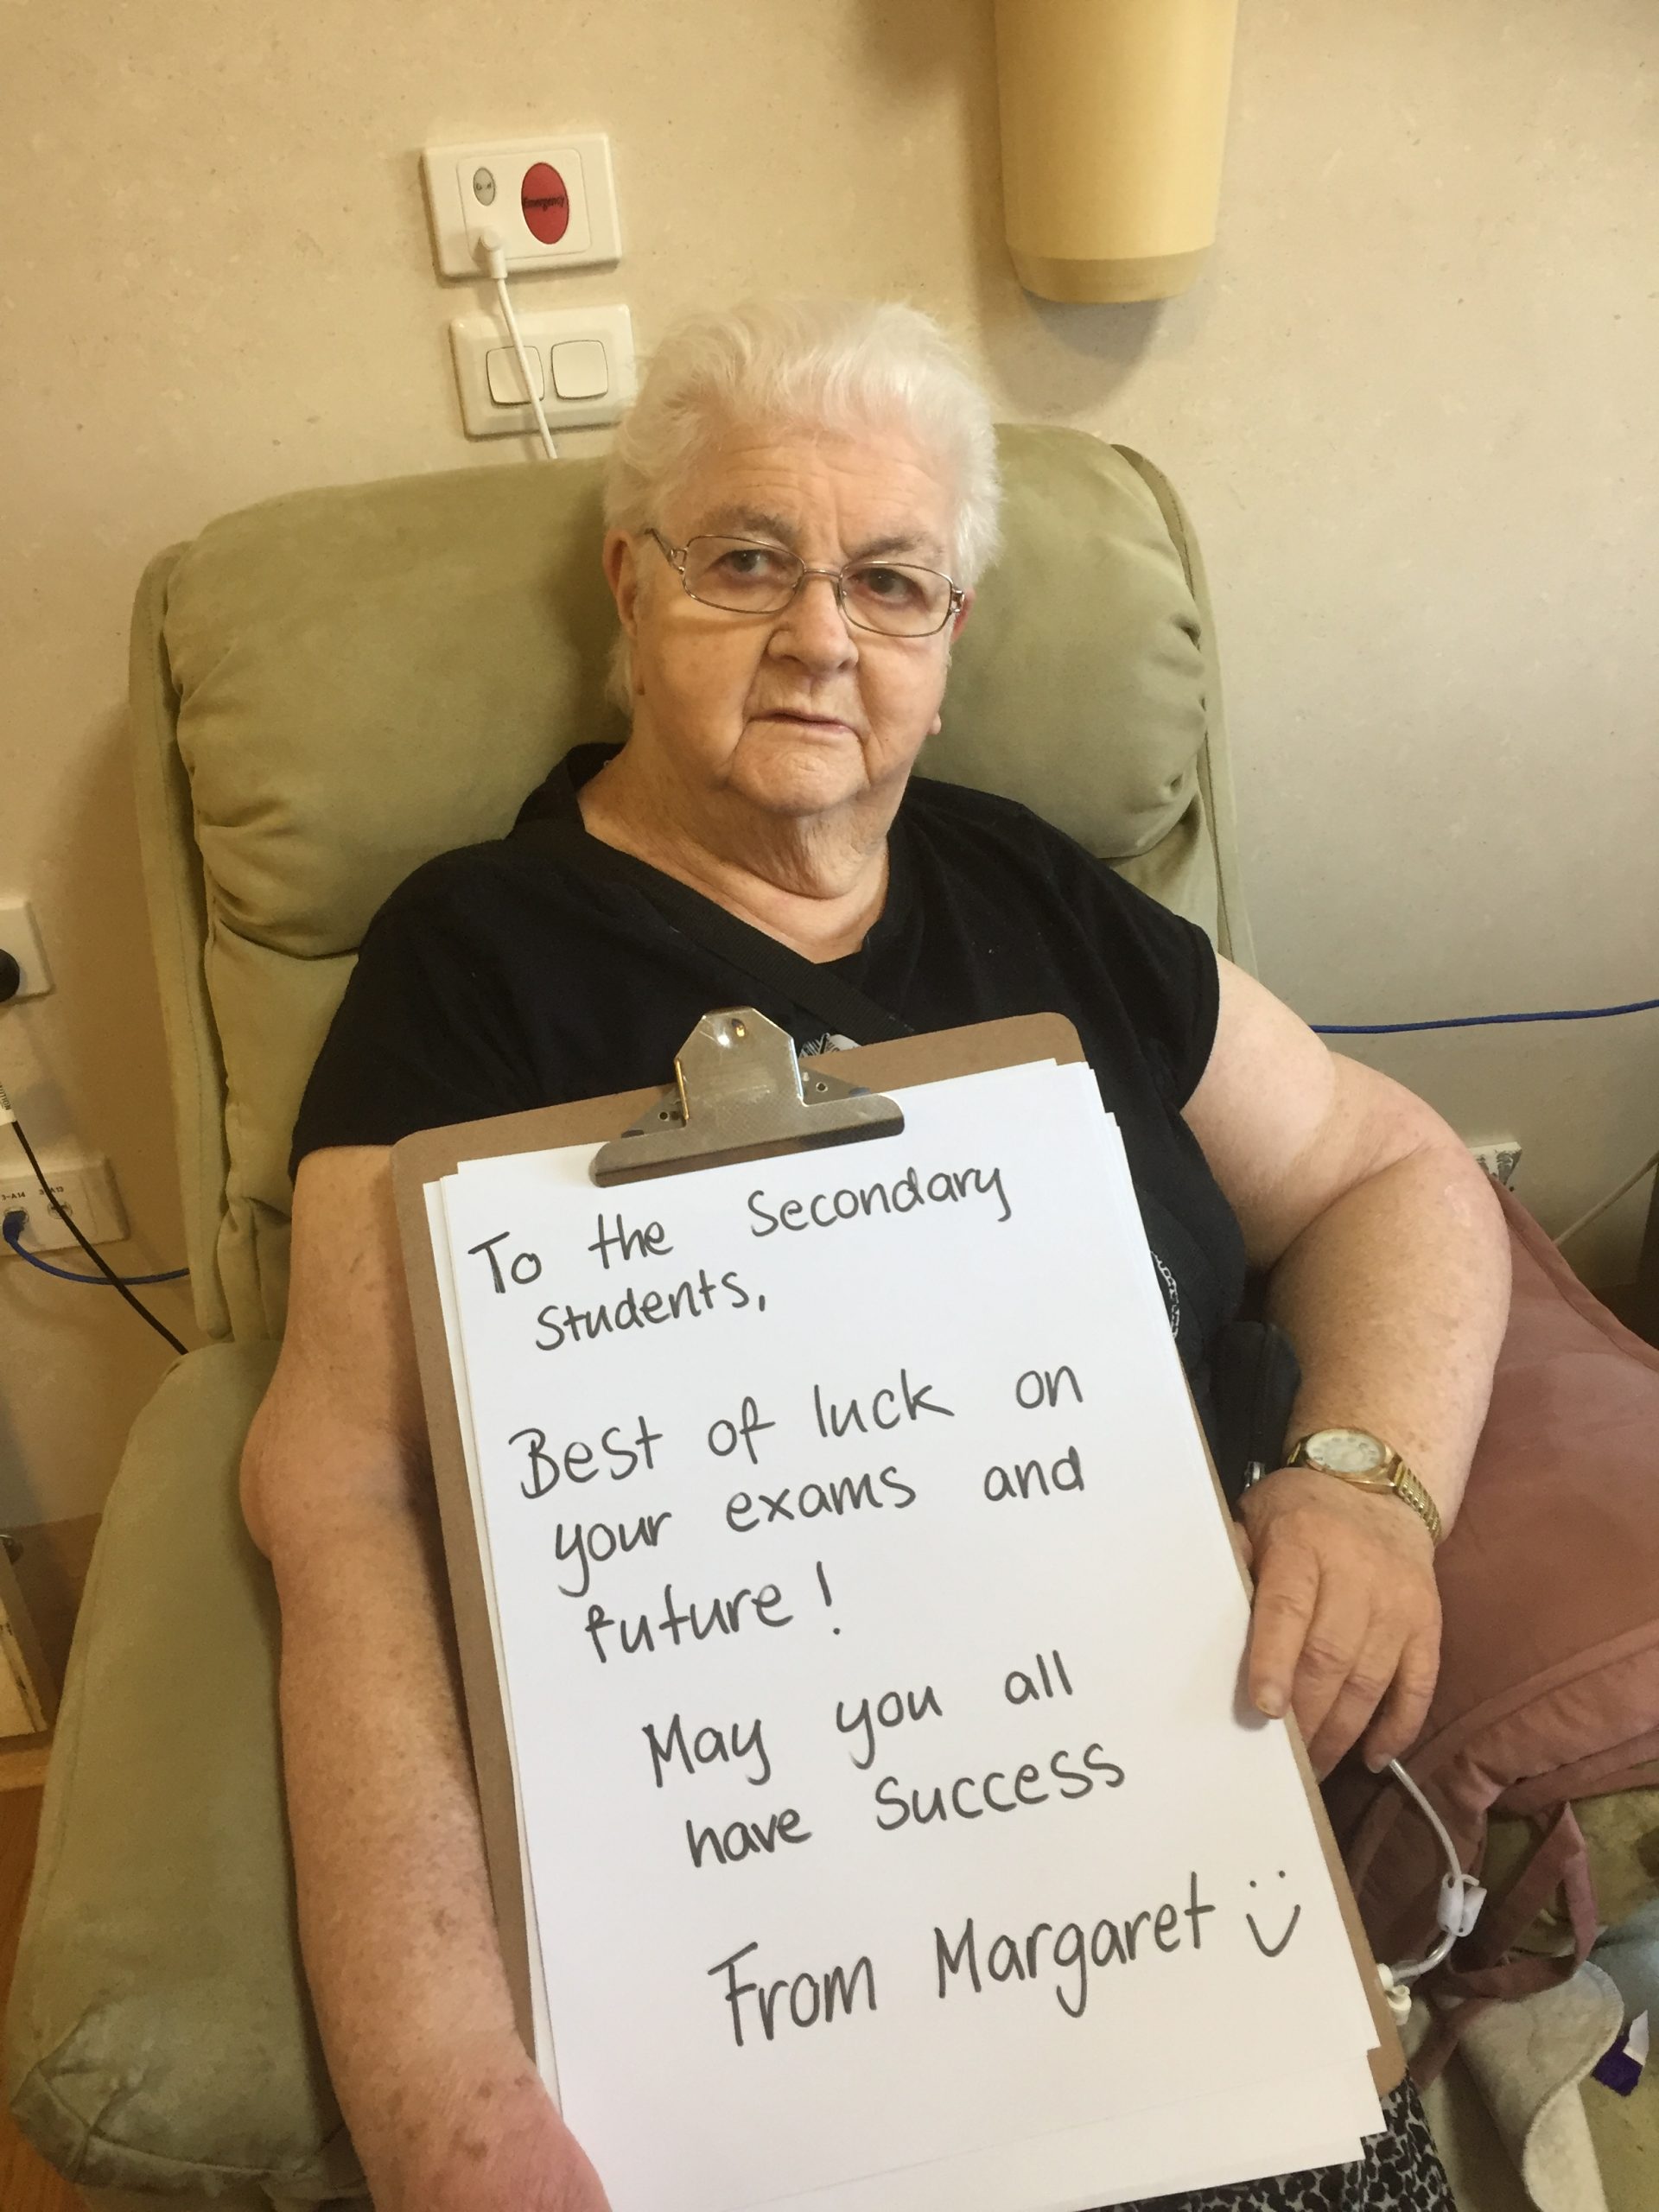 Margaret, a resident sits in an armchair holding a large clipboard with a hand written message which reads "To the Secondary Students, Best of luck on your exams and future! May you all have success. From Margaret."